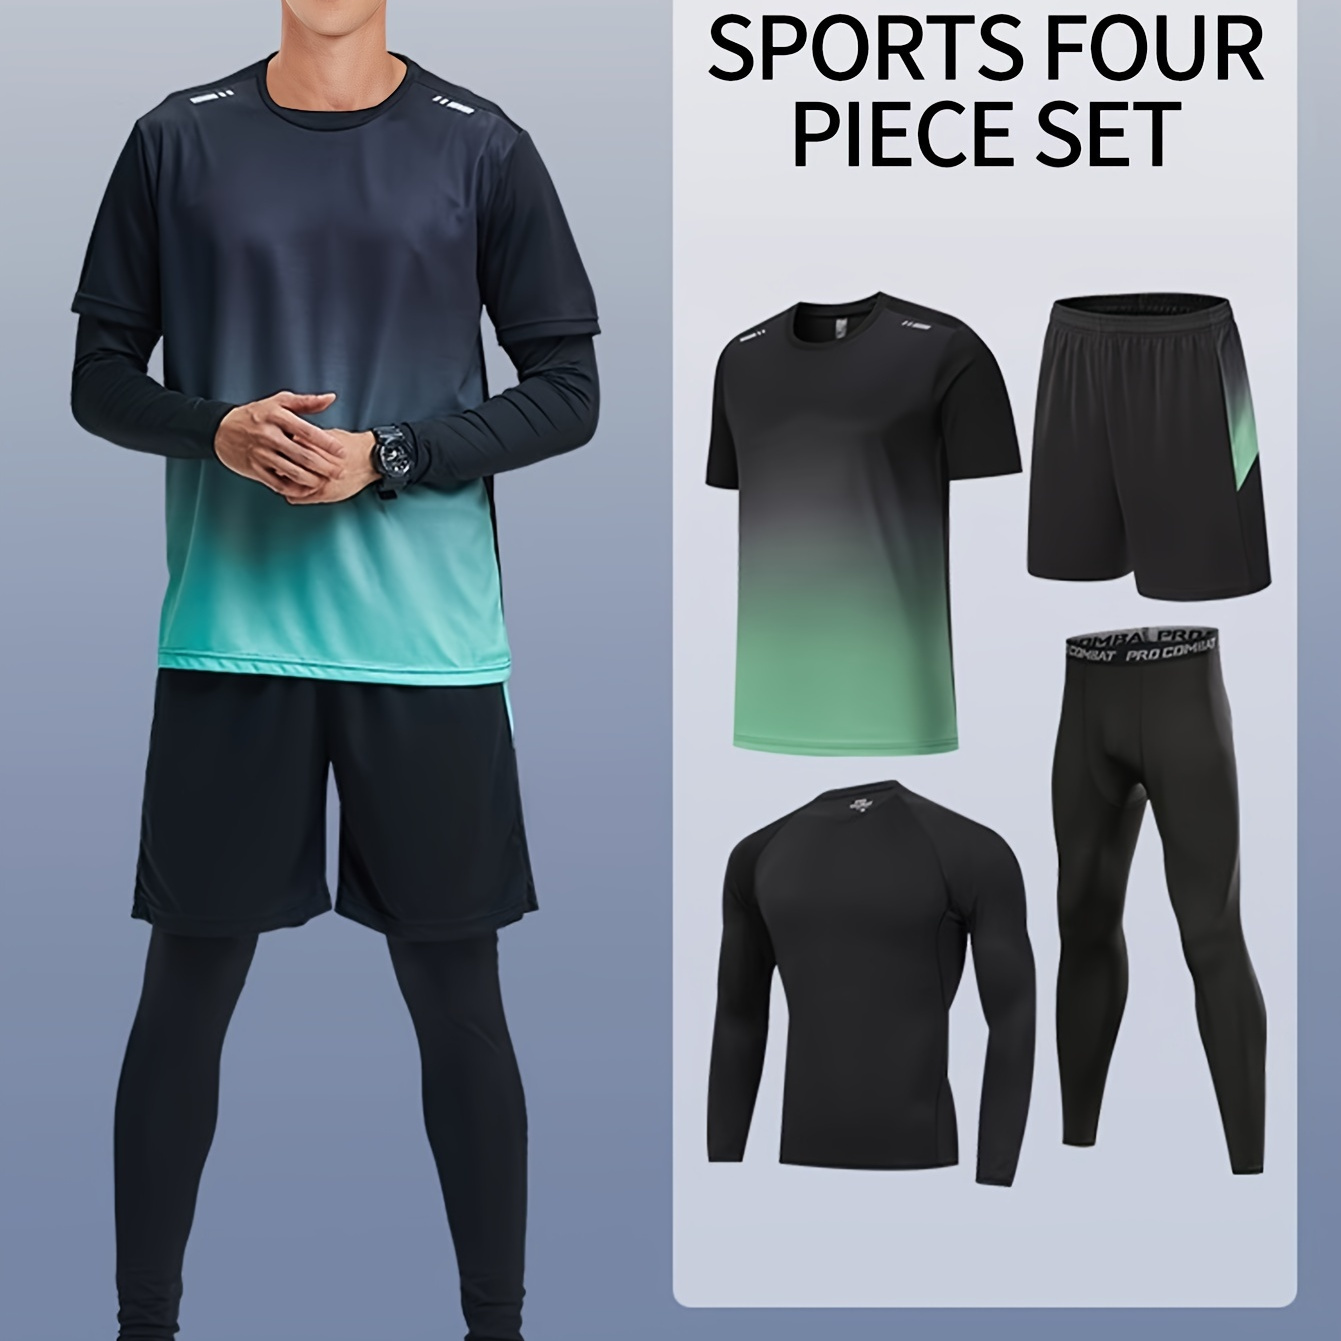 

Men's Sports 4pcs Set, High Stretch Gradient Color T-shirt + Active Shorts + Leggings + Long Sleeve Compression Shirt Matching Set For Running Fitness